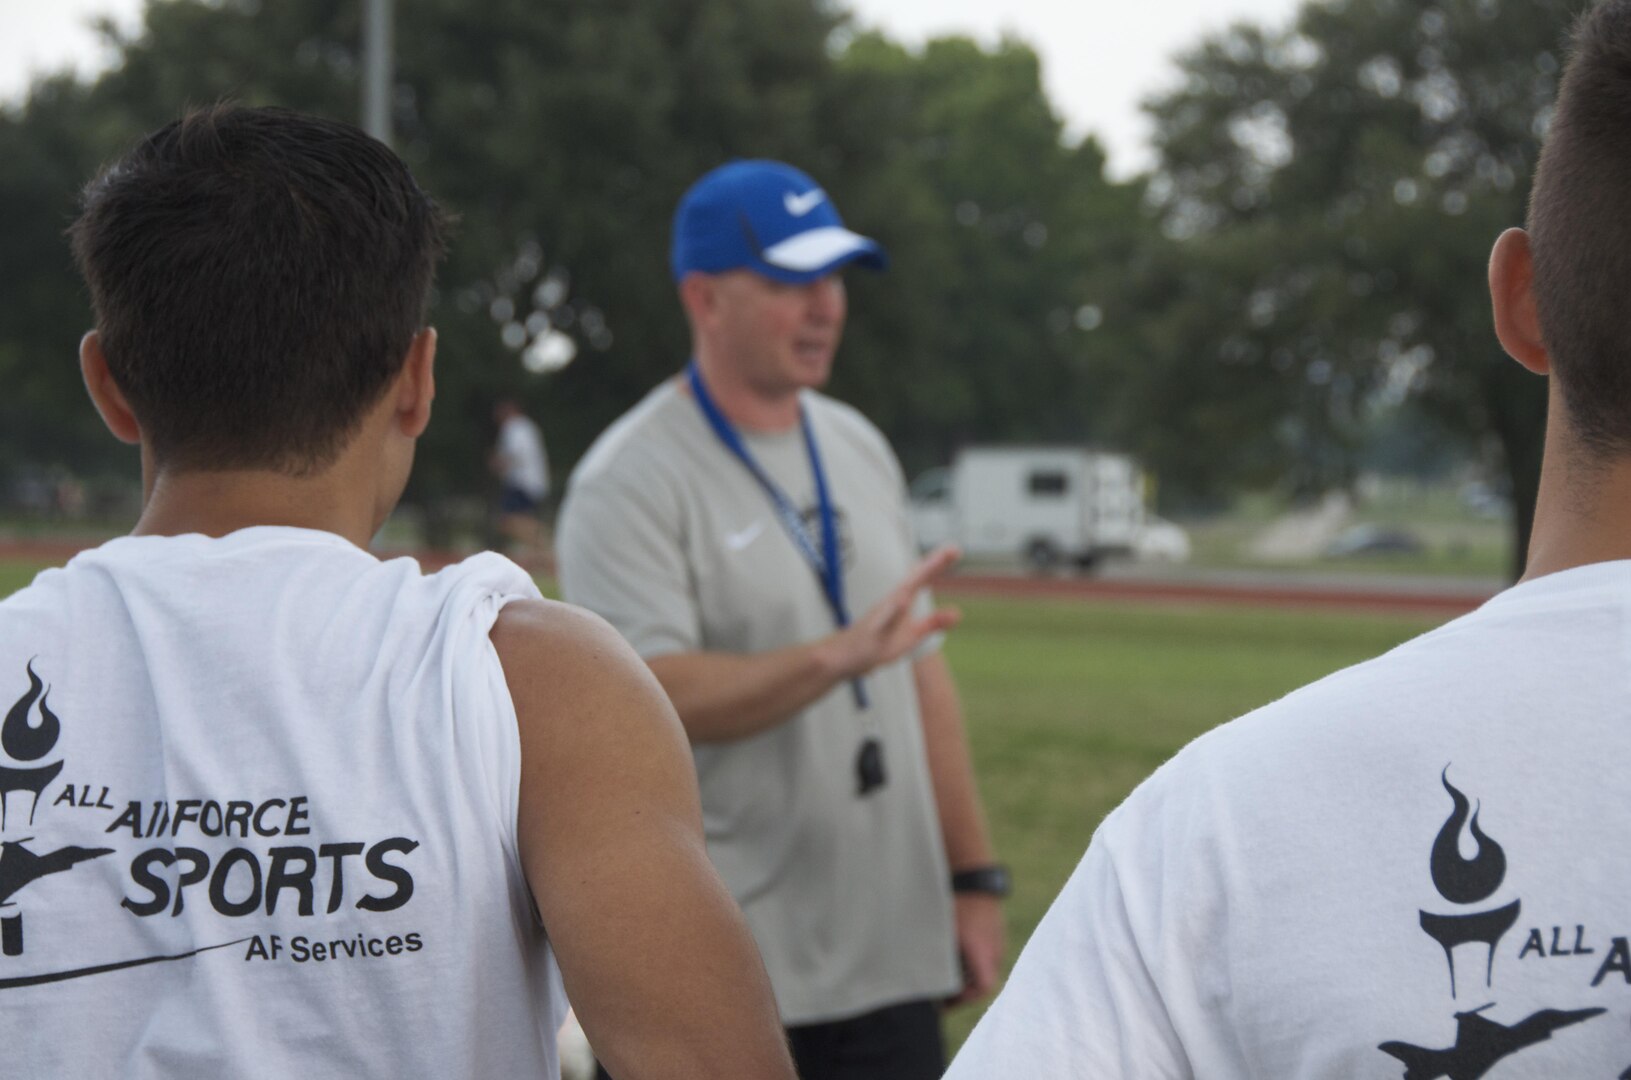 All-Air Force men's soccer coach Lt. Col. Derrick Weyand talks to players during a practice session April 29 at Joint Base San Antonio-Lackland, Texas. The team closed out training camp with a 12-4 record. (U.S. Air Force photo/Steve Warns/Released) 